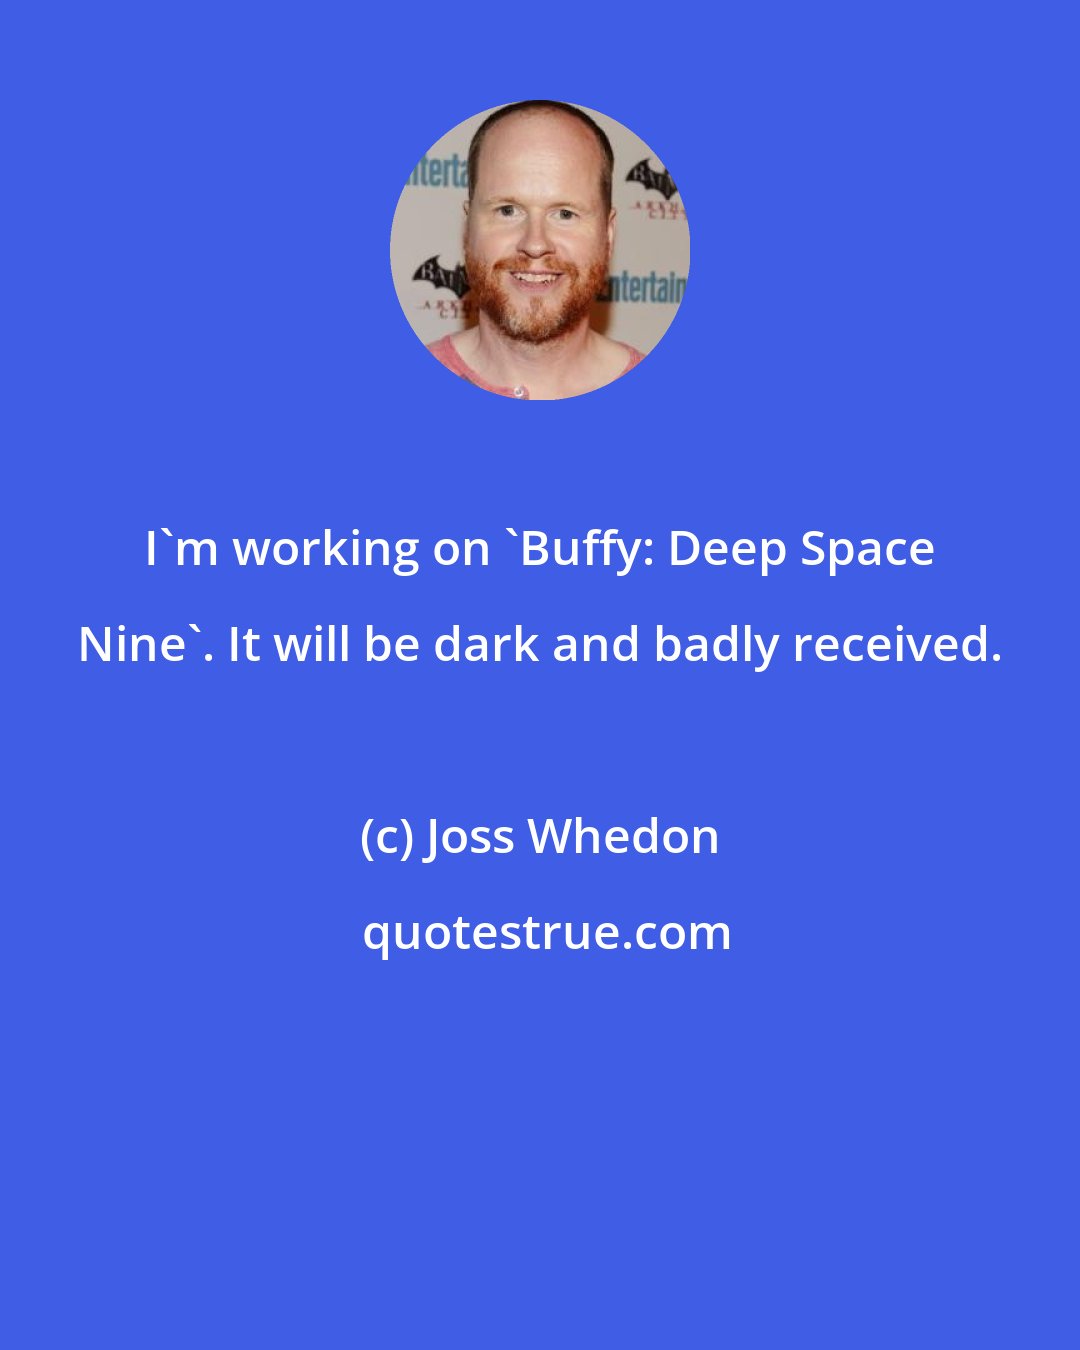 Joss Whedon: I'm working on 'Buffy: Deep Space Nine'. It will be dark and badly received.